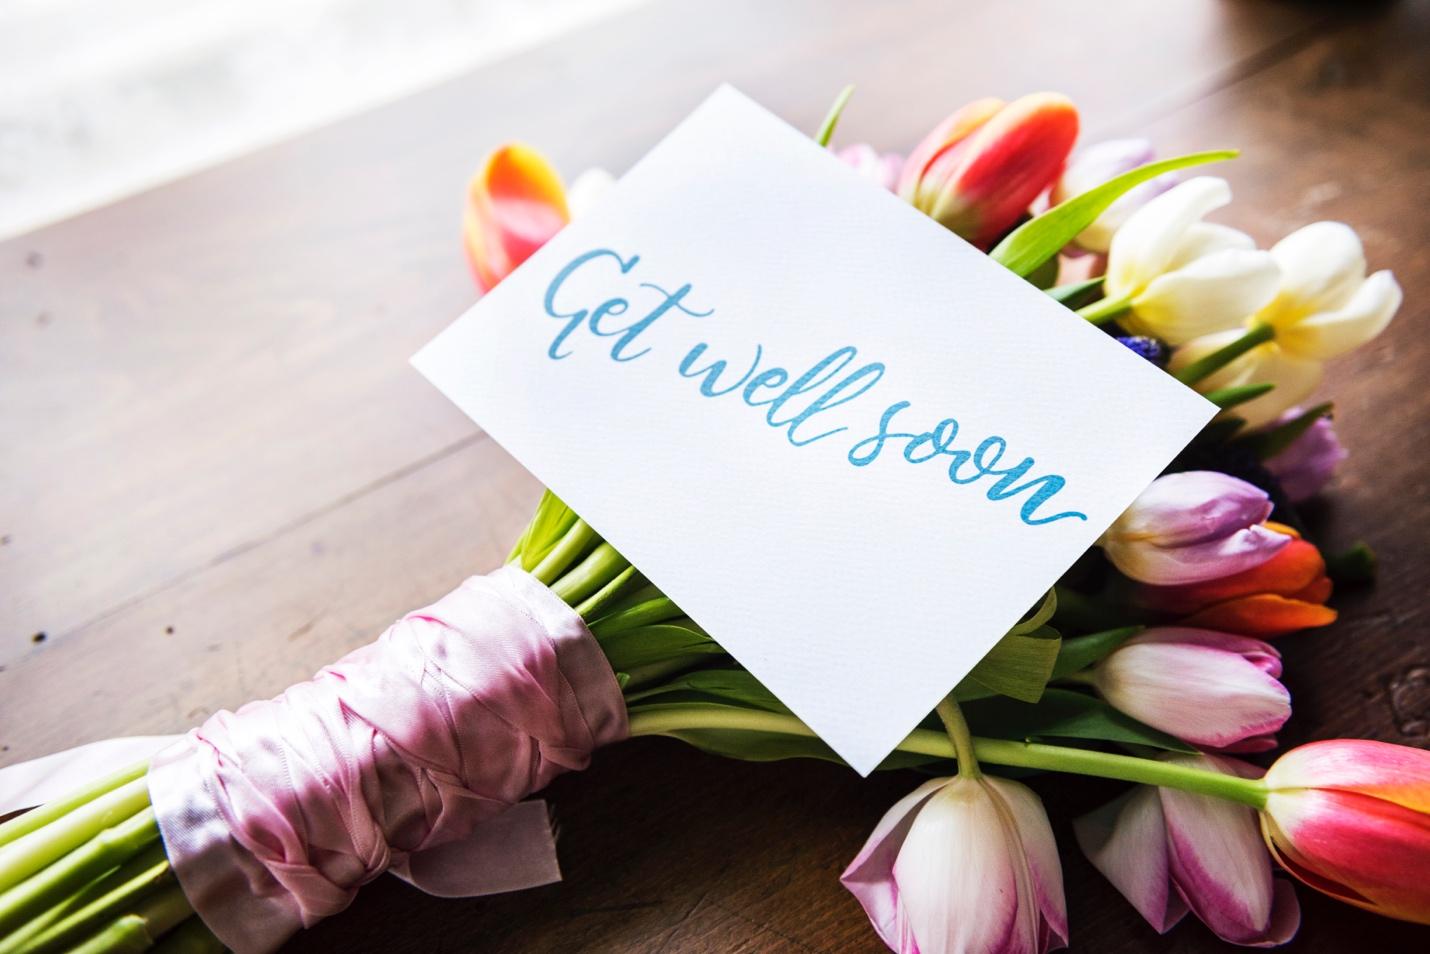 Get Well Soon Messages to Pair with Your Get Well Flowers